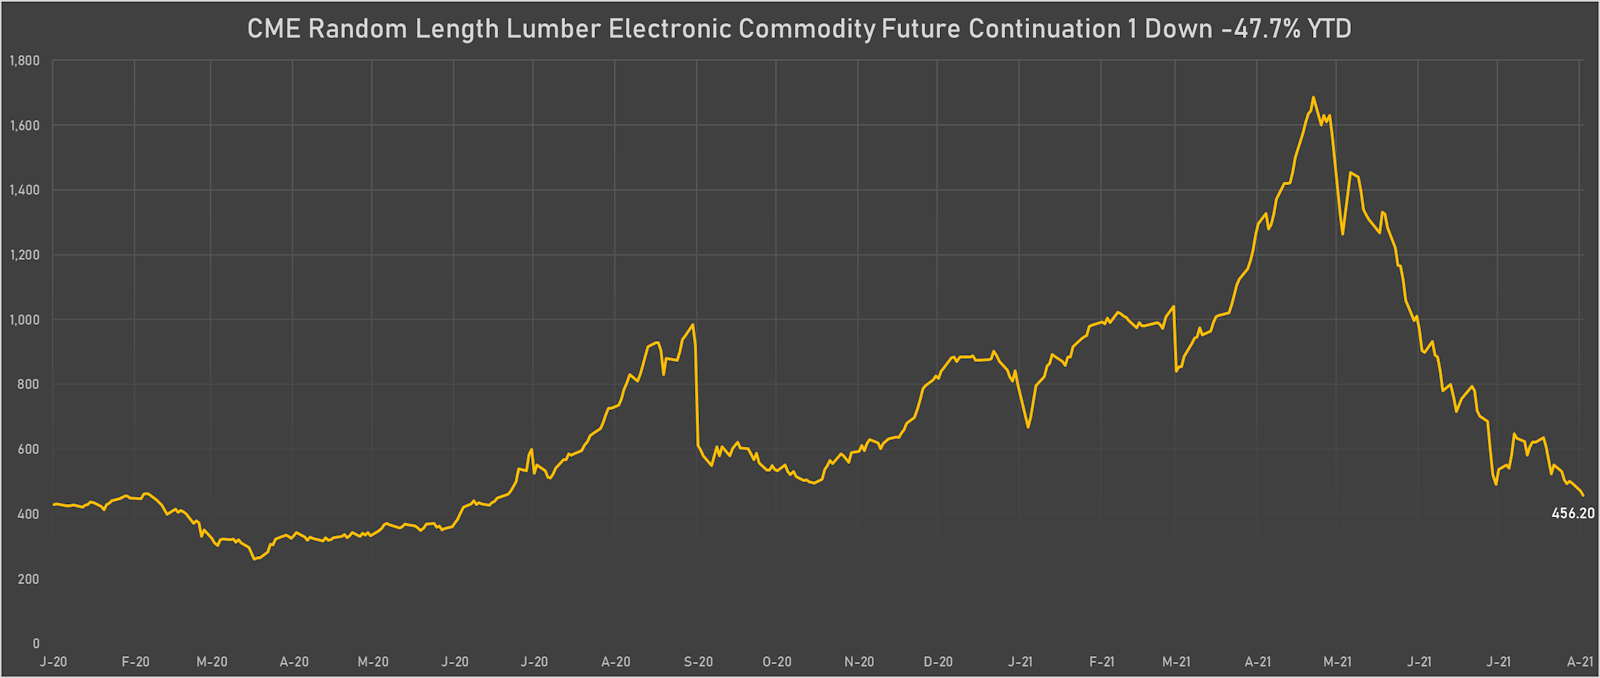 Lumber front-month futures prices are now down close to 50% year to date | Sources: ϕpost, Refinitiv data